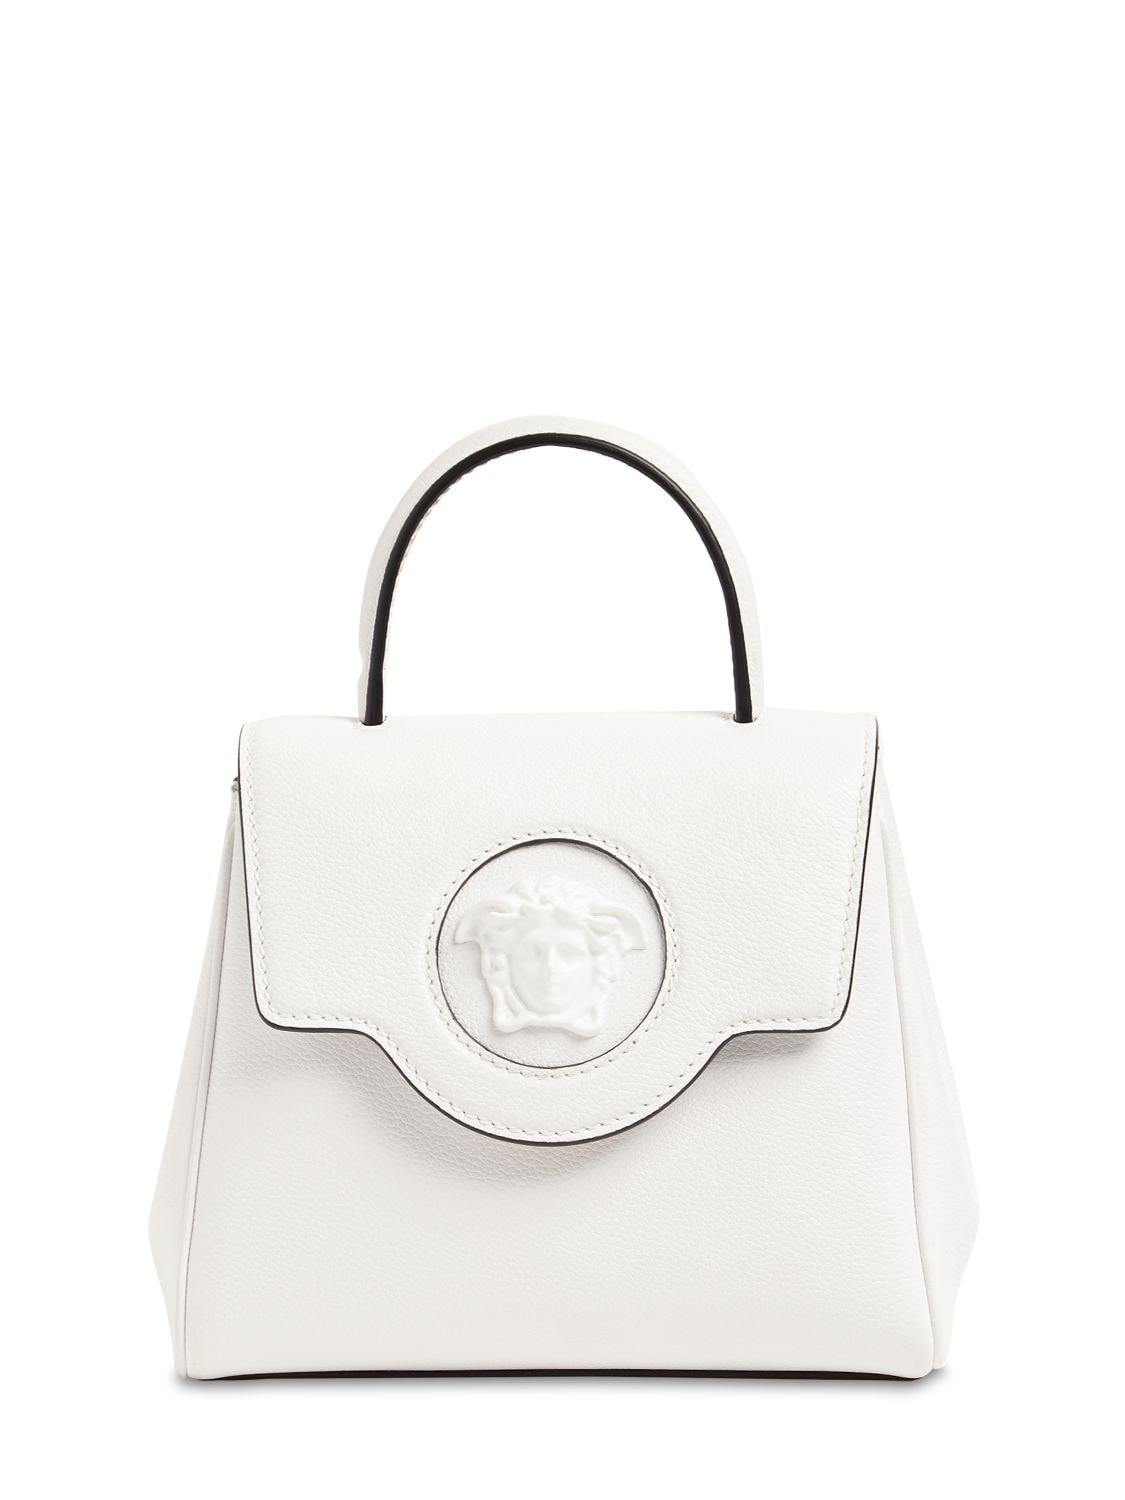 Versace Small Leather Medusa Top Handle Bag In Bianco Ottico